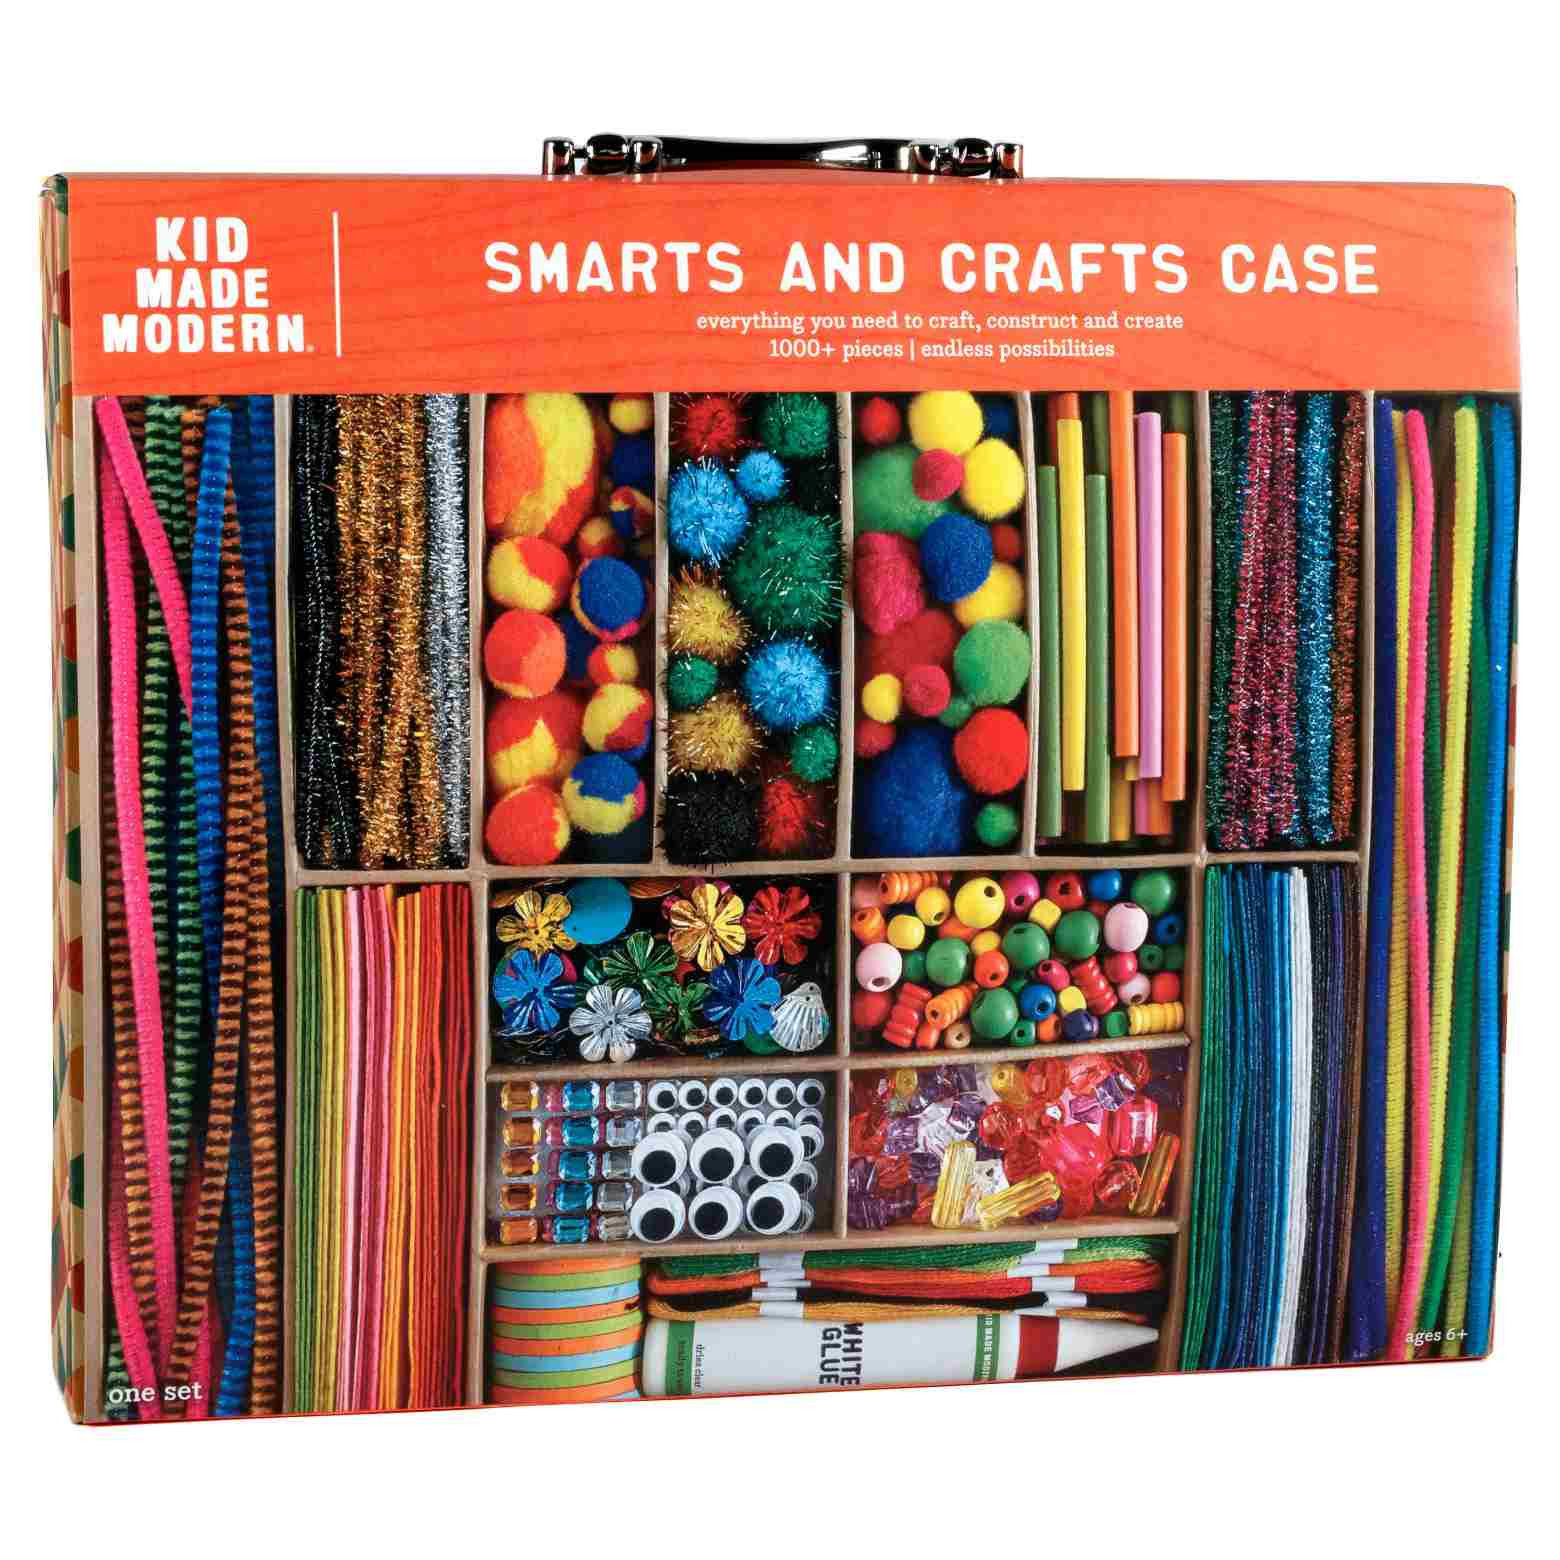 Best Craft Kits For Kids
 The 9 Best Craft Kits for Kids in 2020